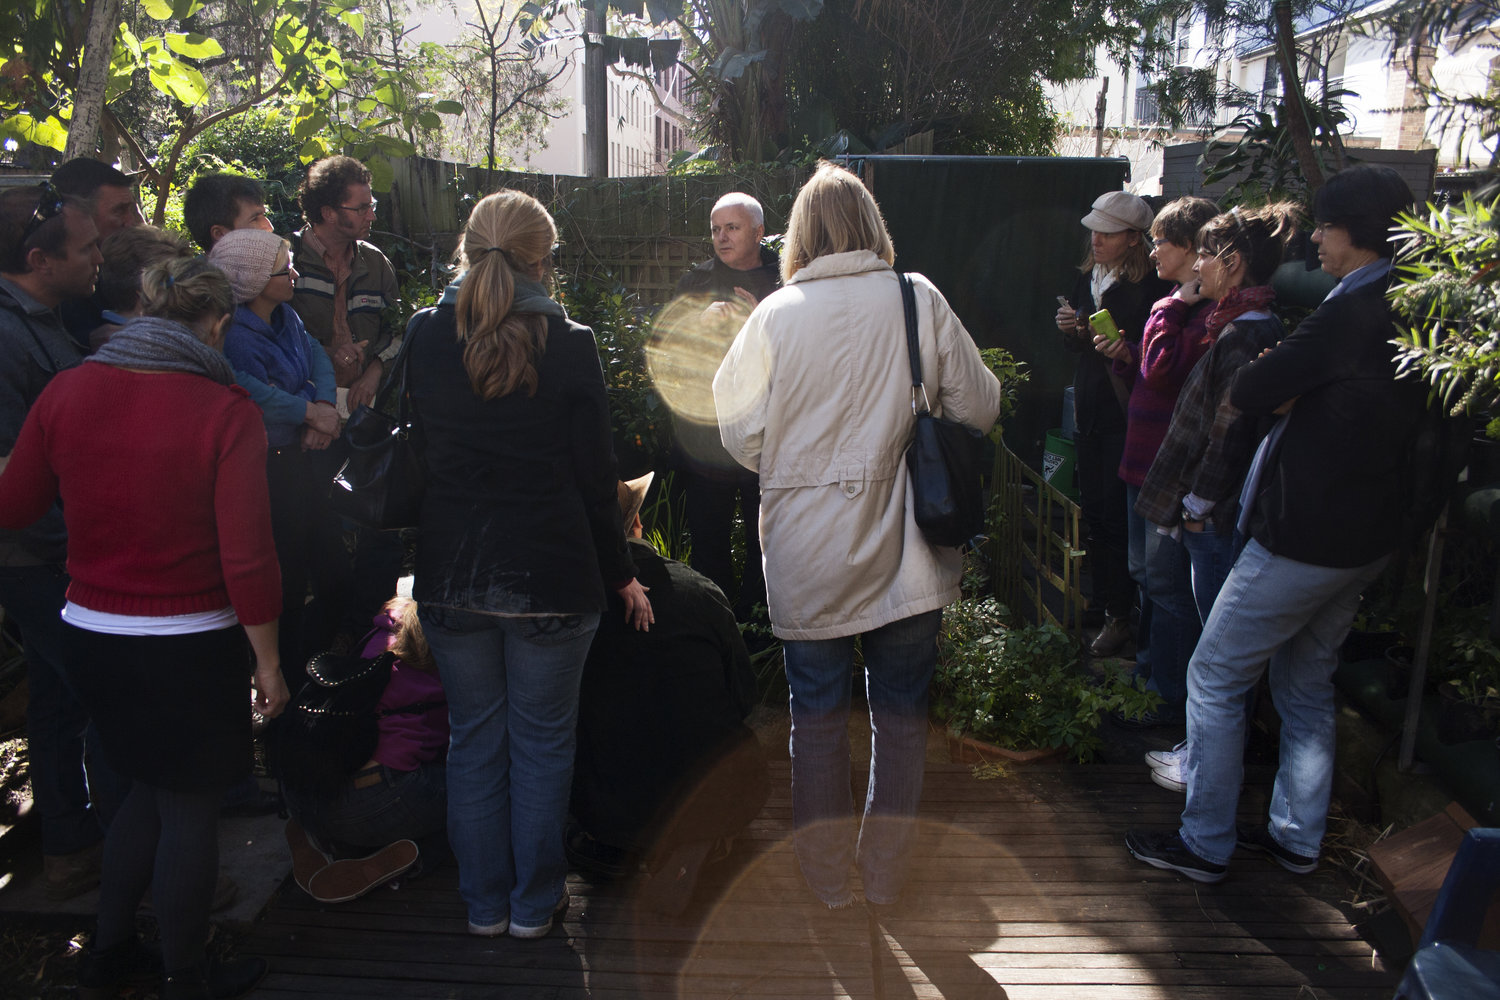   A tour group in the garden of Sydney's Sustainable House  